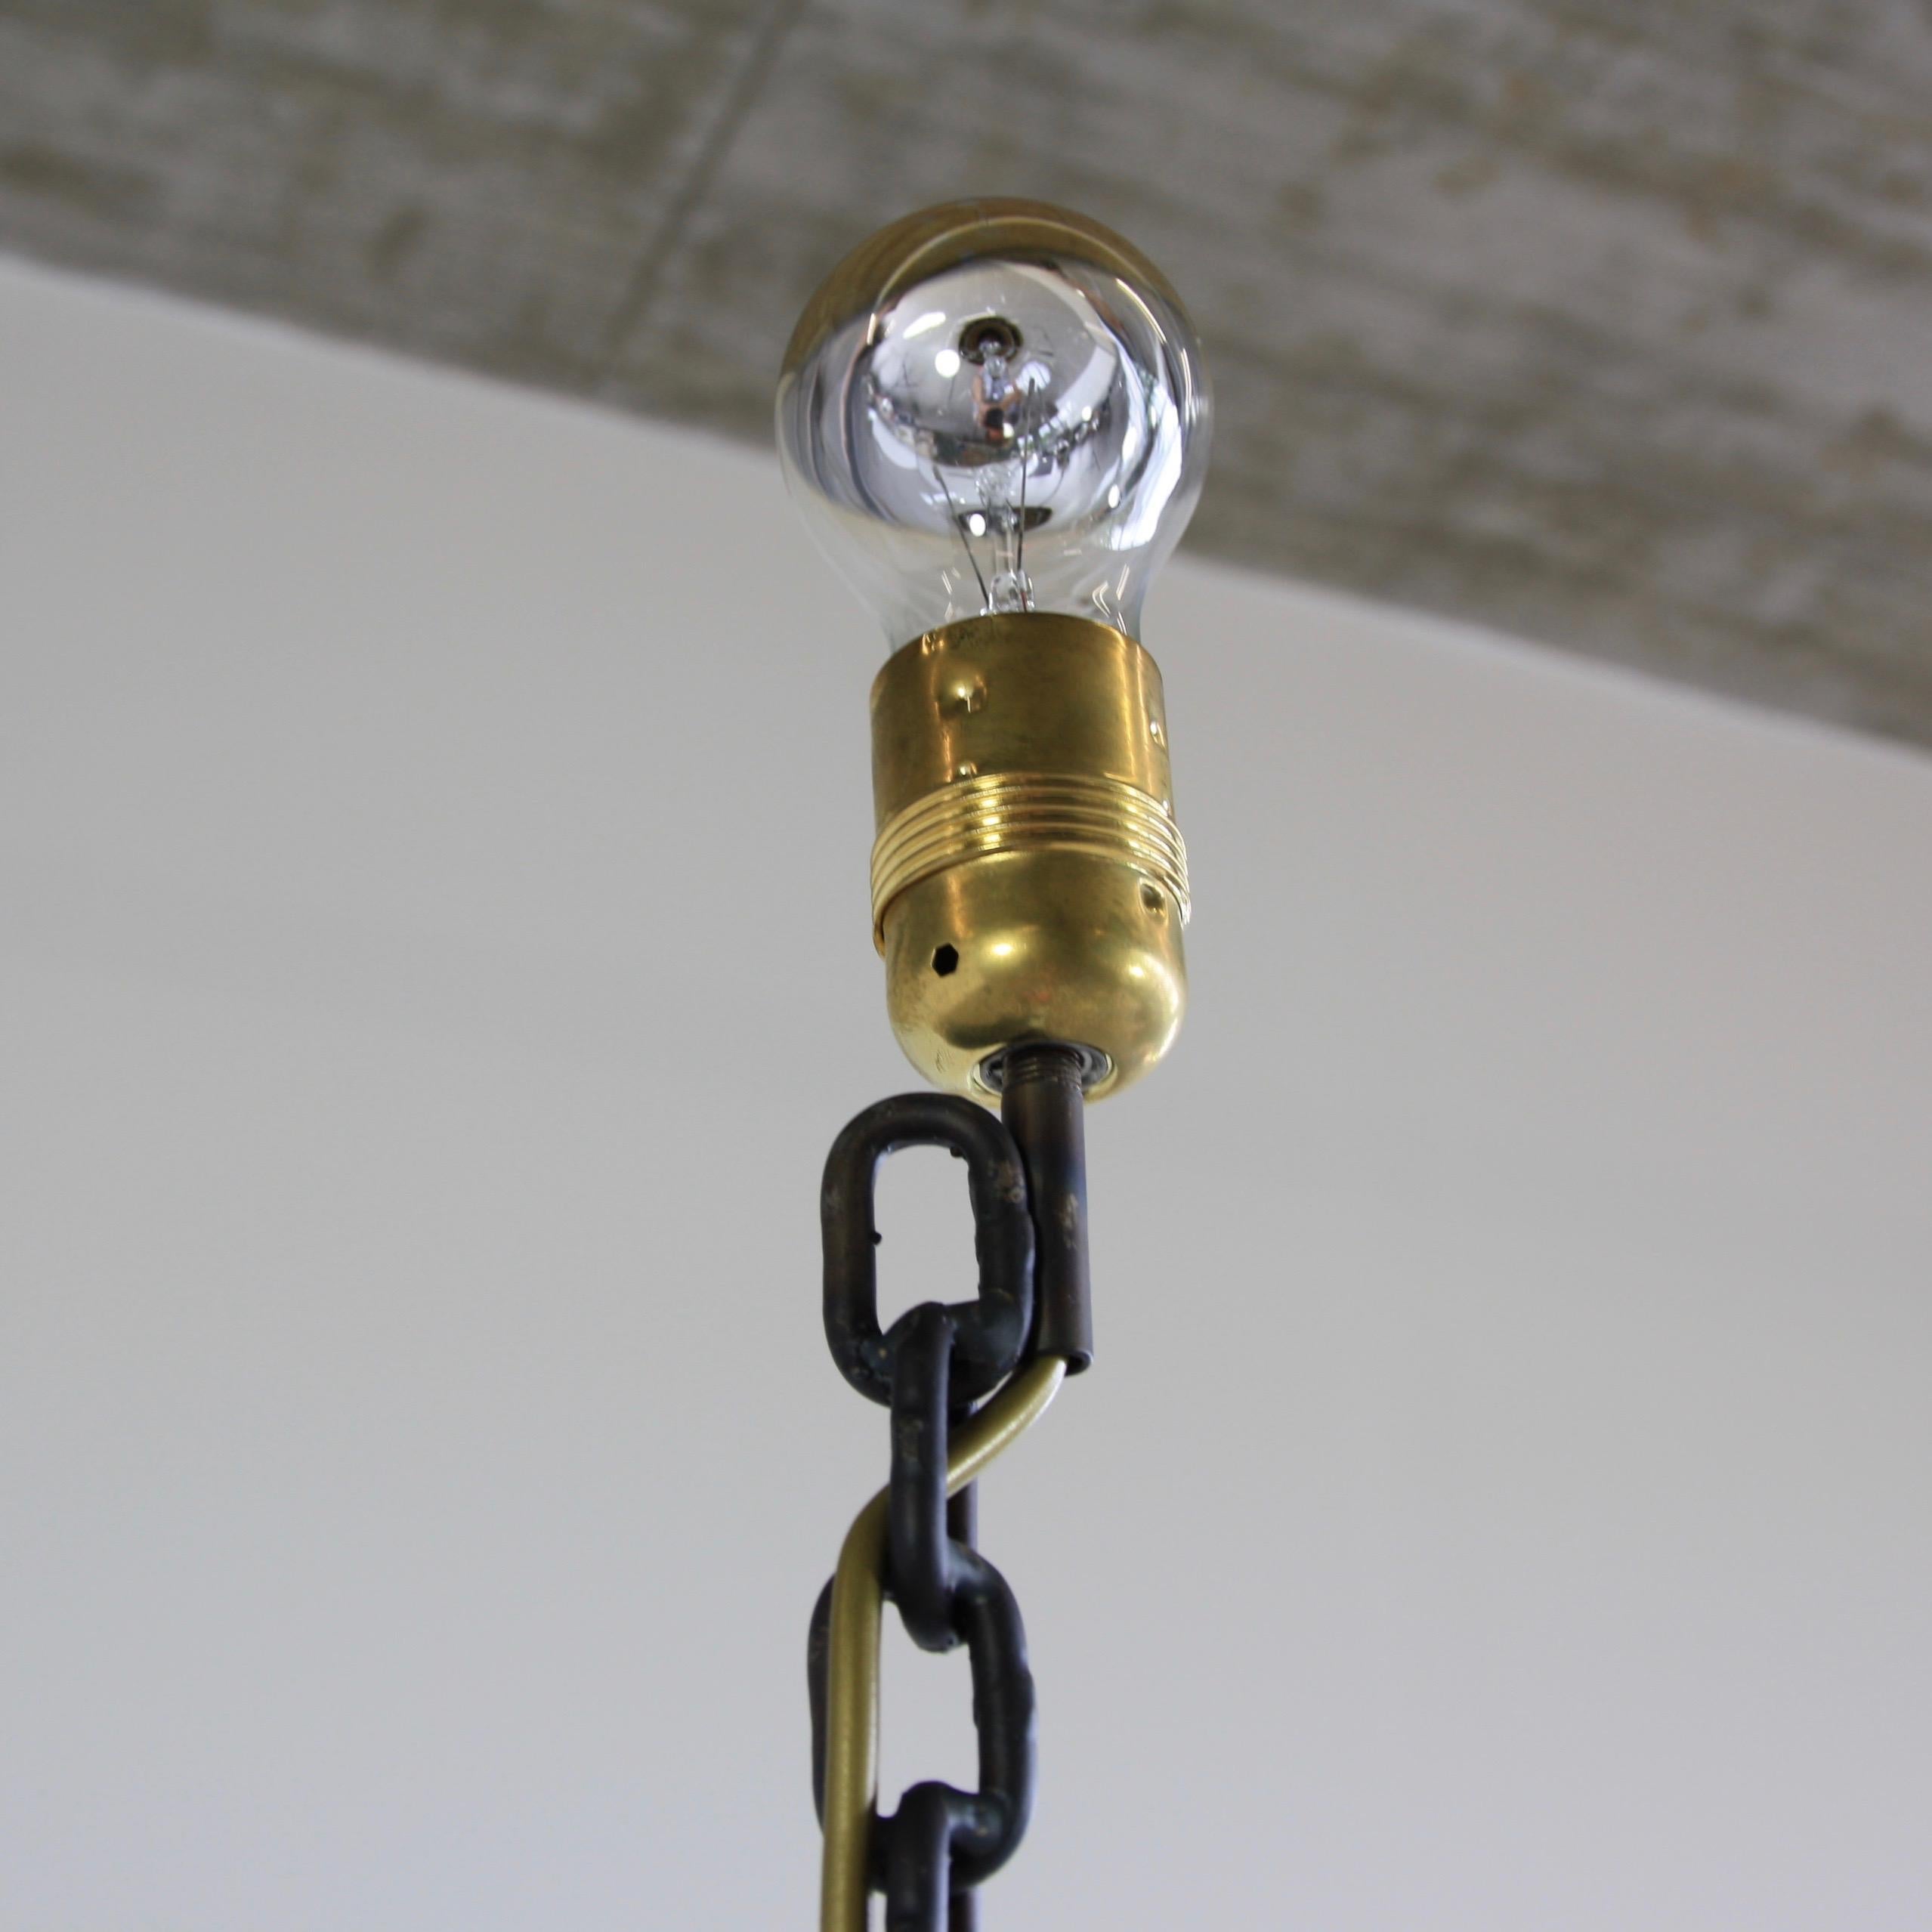 Private II lamp designed by the Austrian artist and designed Franz West in 1989, Italy.

Enameled and welded black iron chain floor lamp.

Important: This is the original!!

